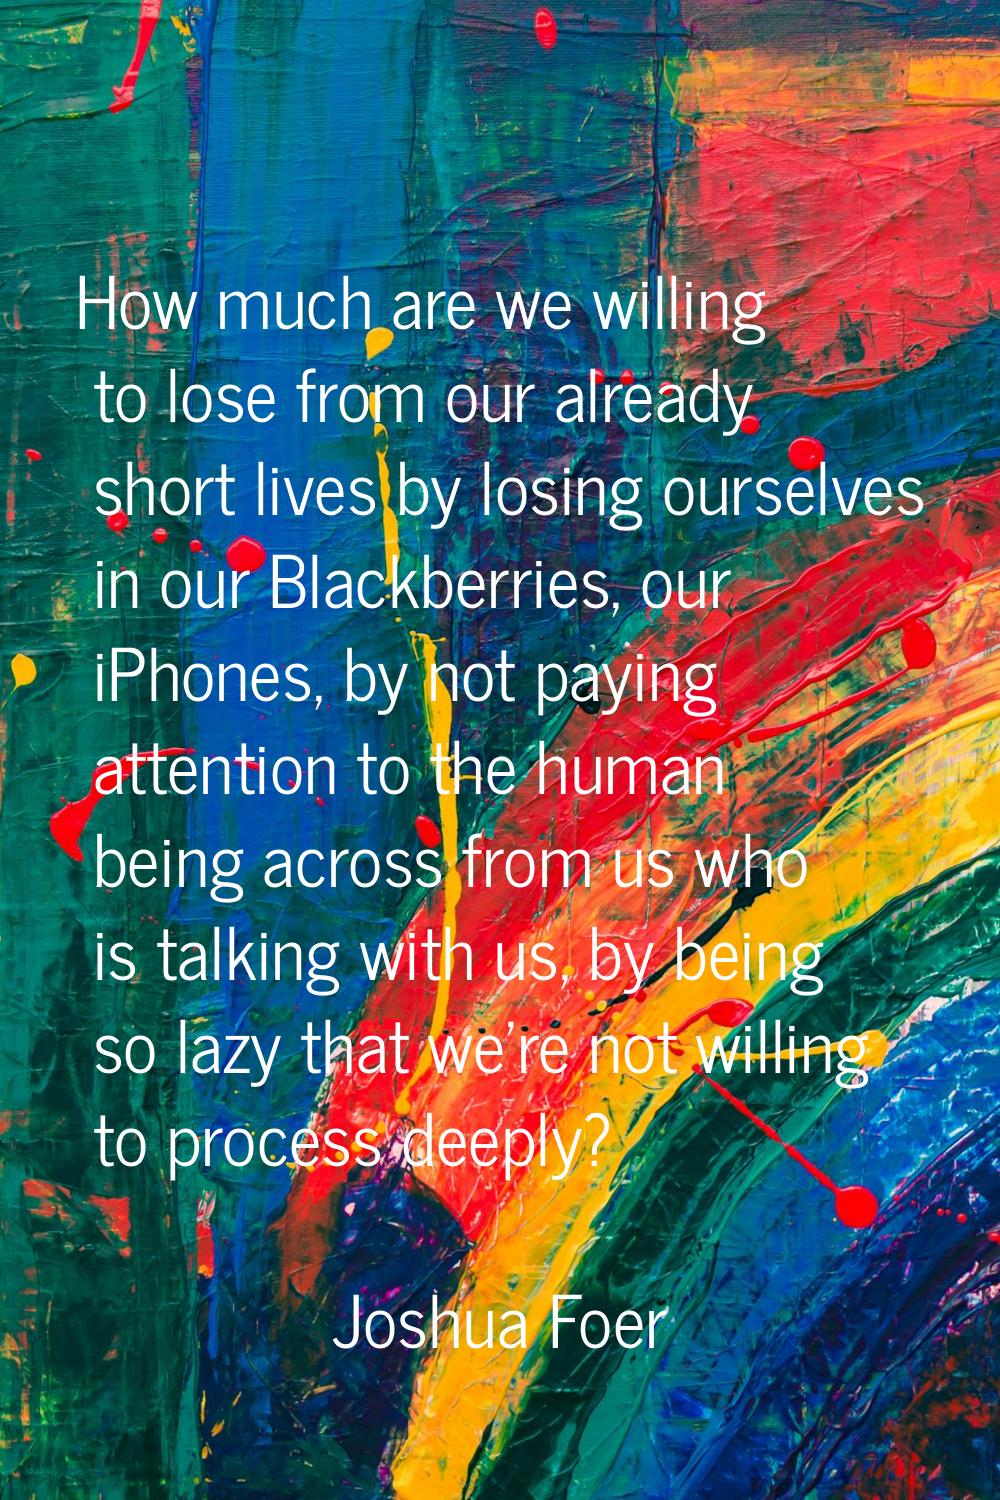 How much are we willing to lose from our already short lives by losing ourselves in our Blackberrie